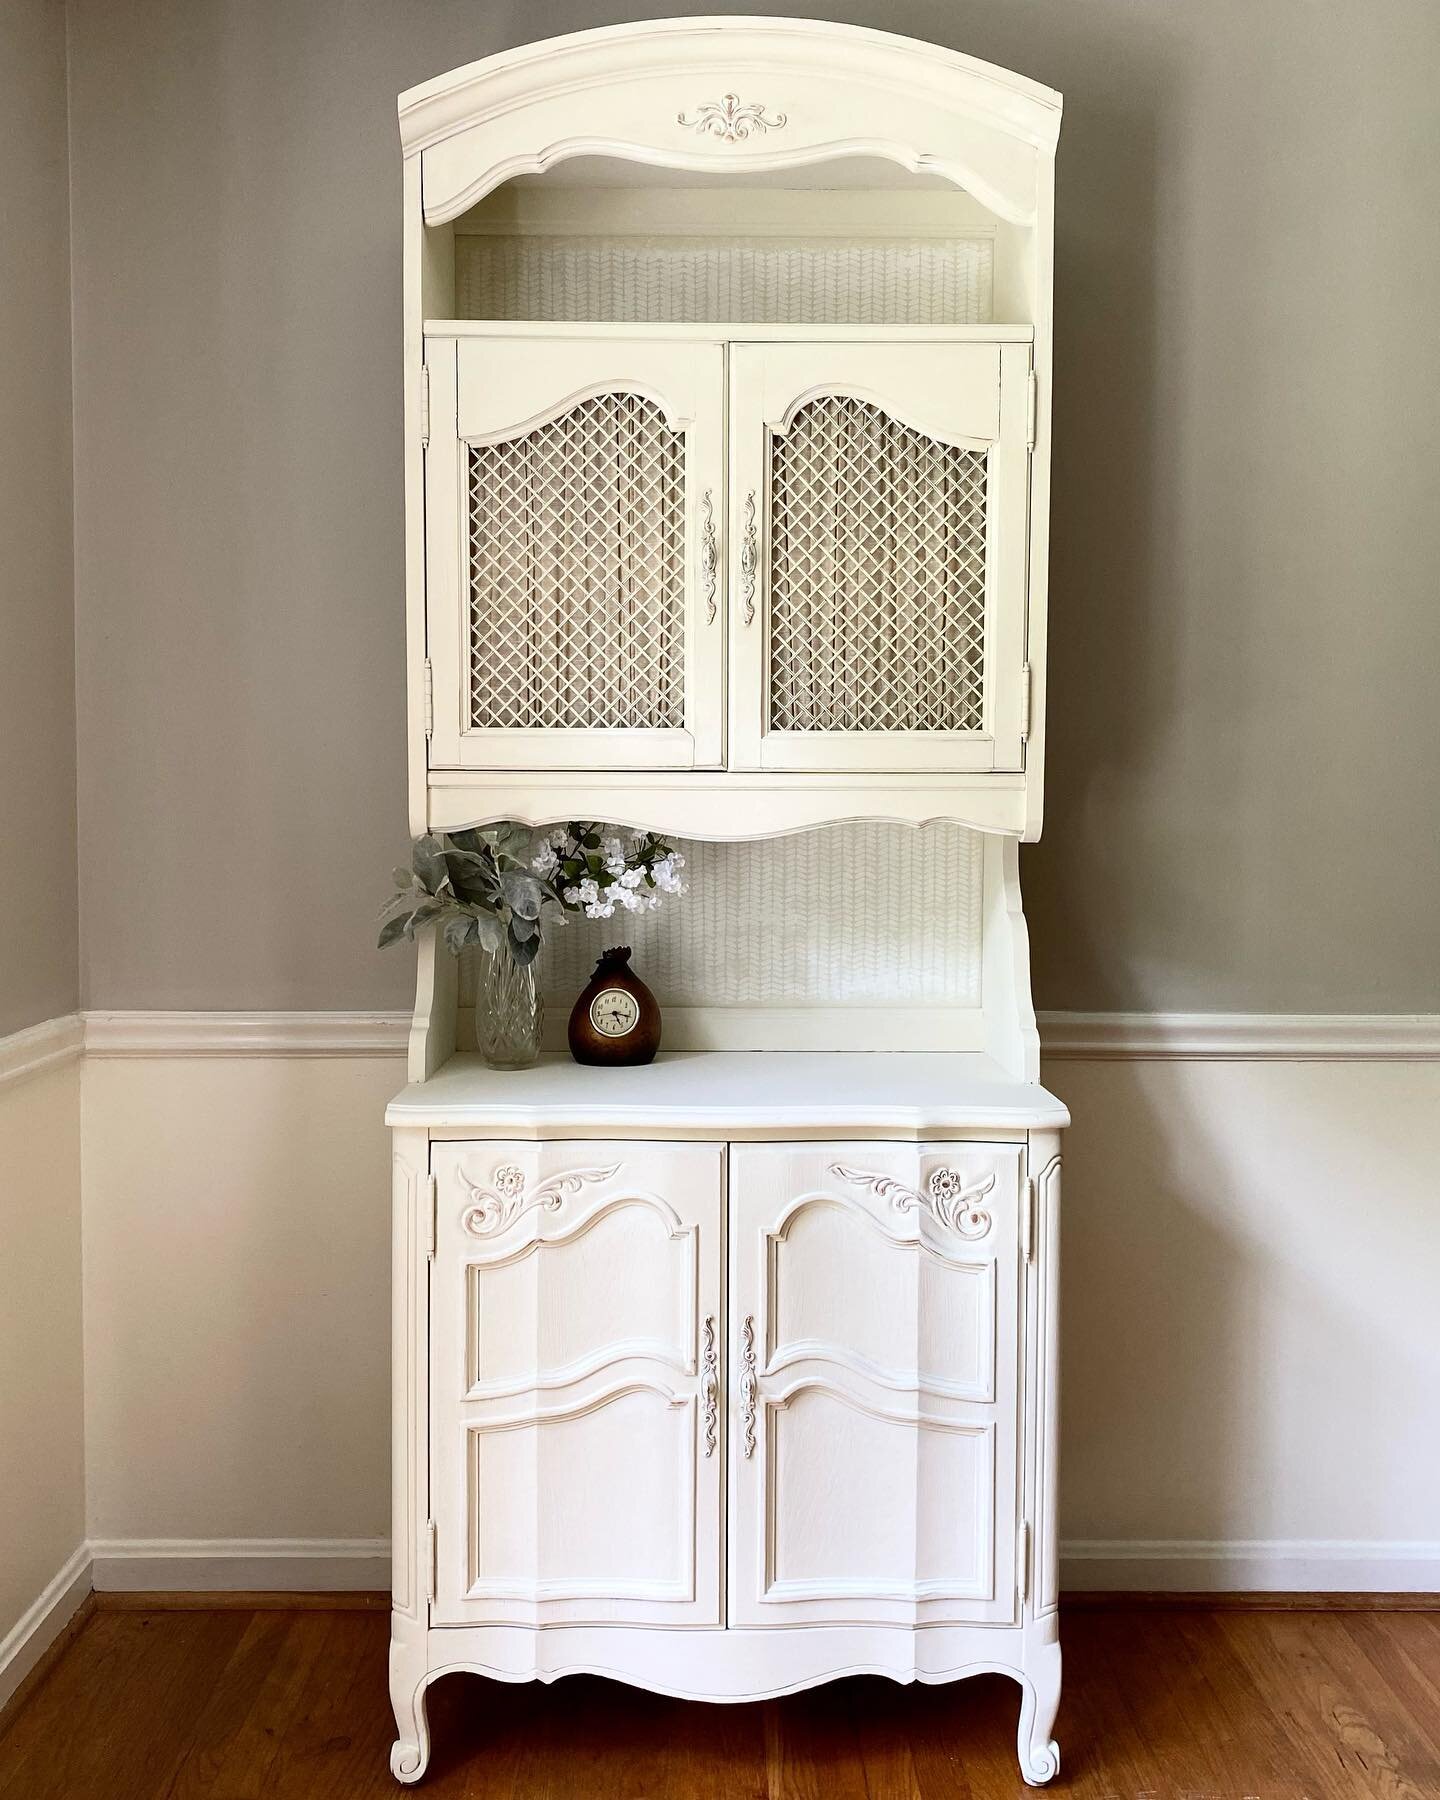 Cottage Dresser Makeover — Suzanne Bagheri @The Painted Drawer